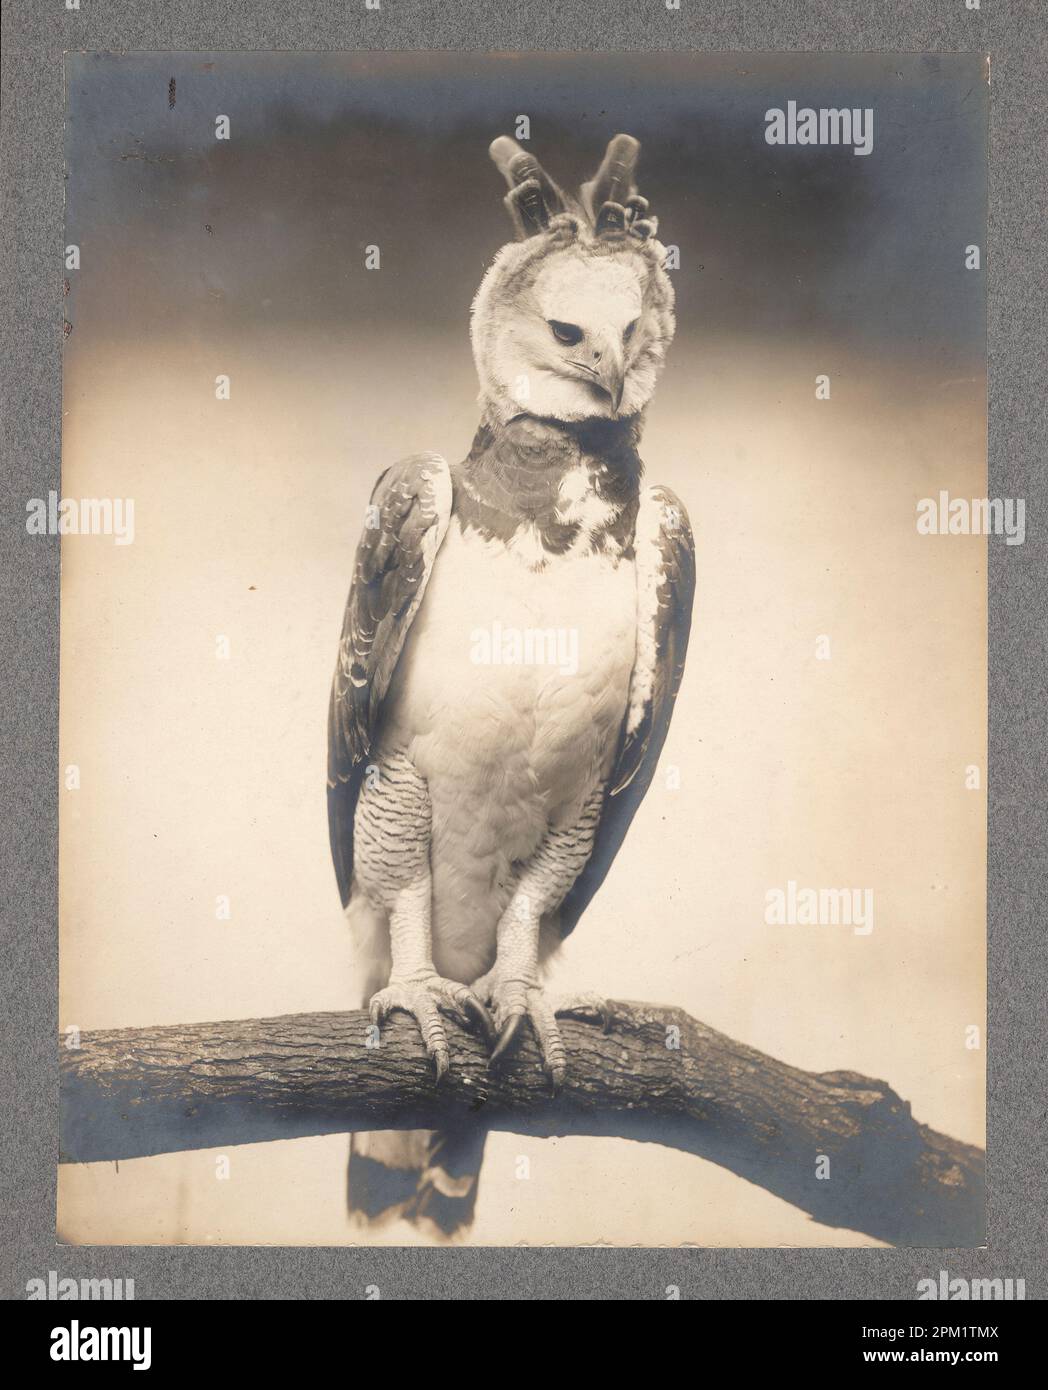 Vintage black and white photograph of a Harpy Eagle, Harpia harpyja, perched on a branch,c. 1899 Stock Photo